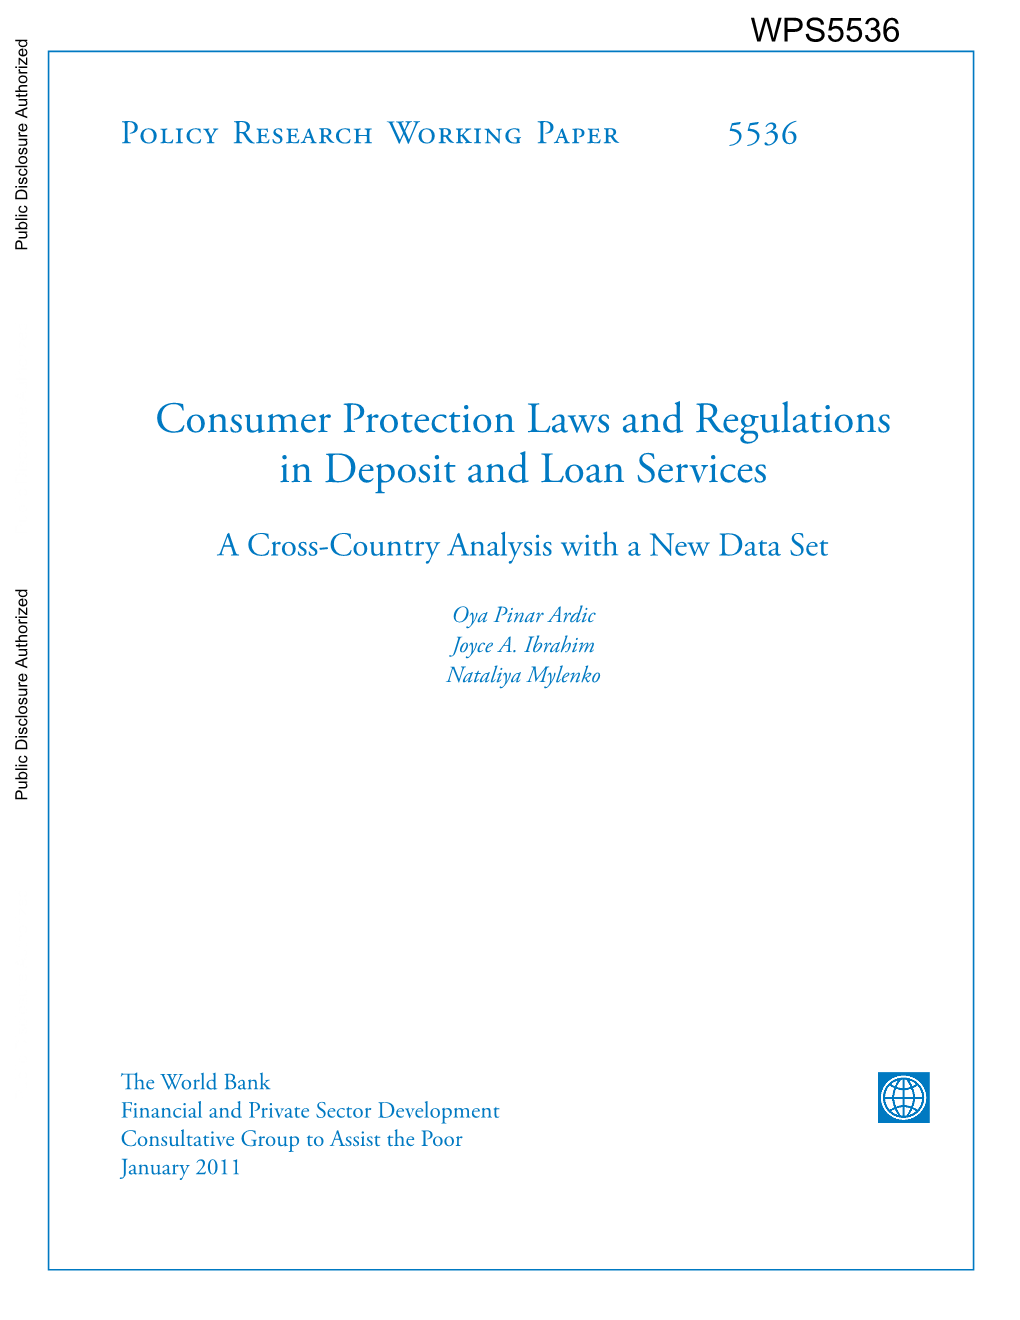 Consumer Protection Laws and Regulations in Deposit and Loan Services